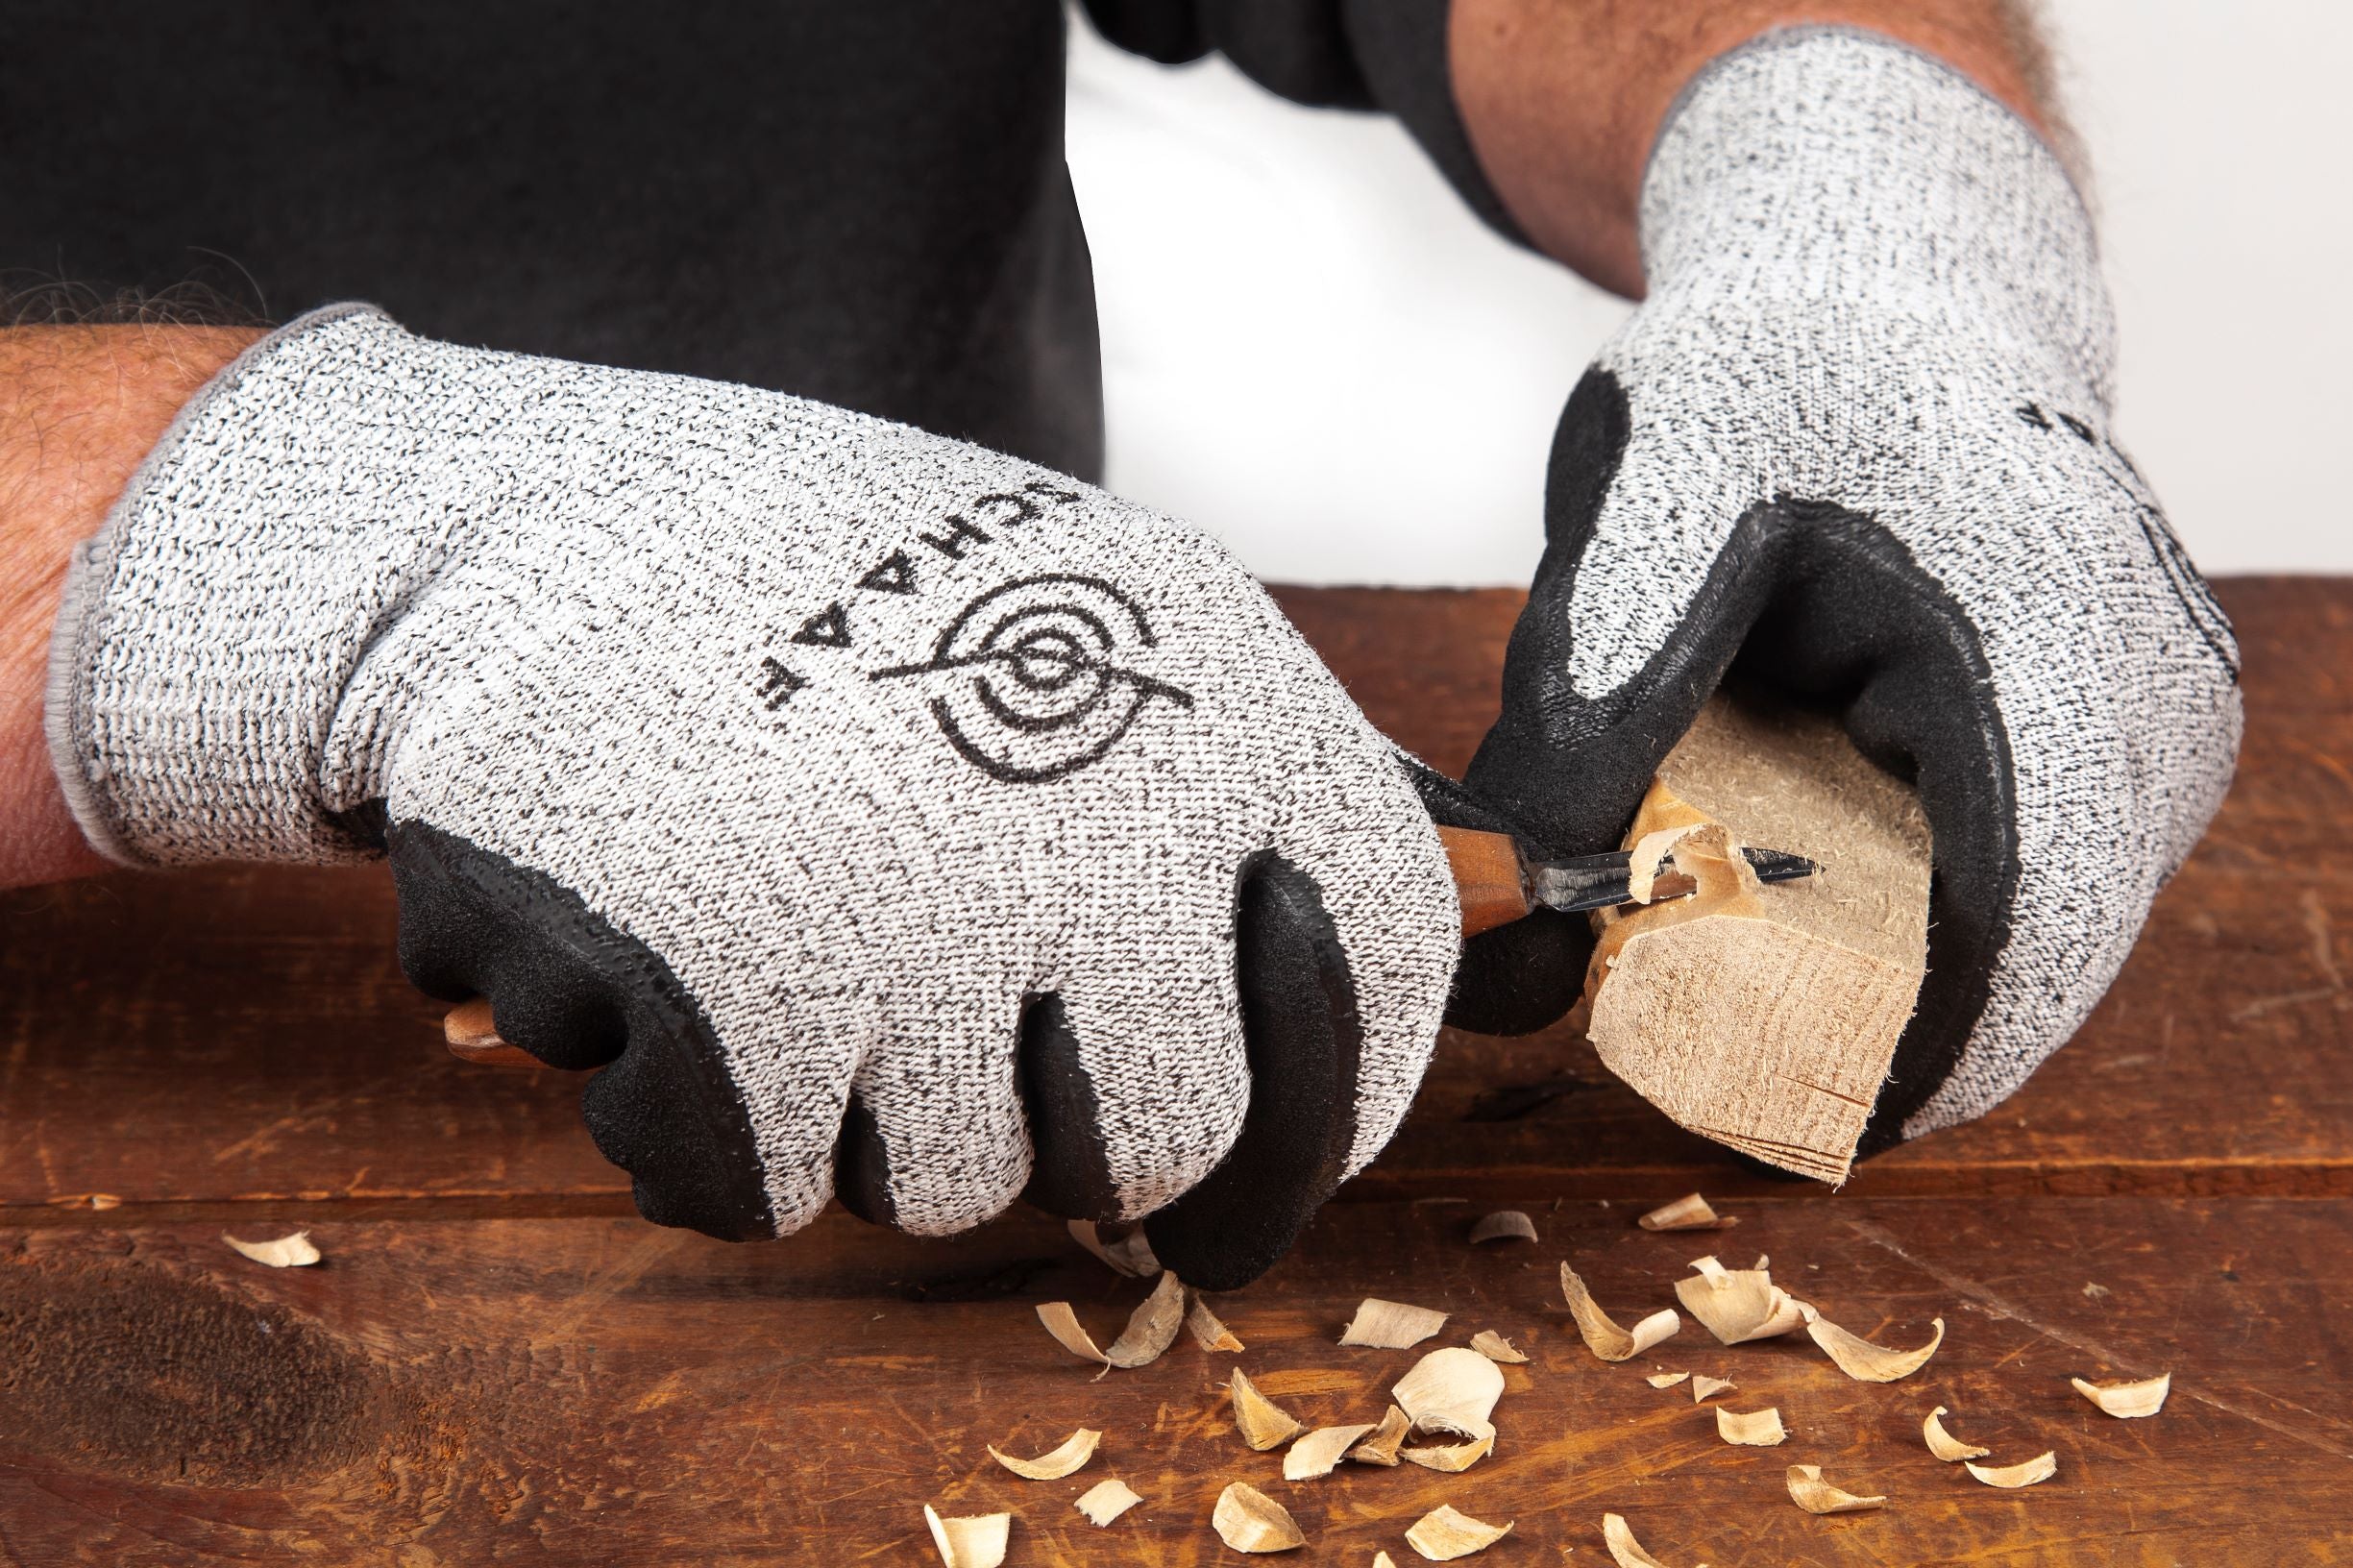 Carving Wood While Wearing Cut-Resistant Gloves | Schaaf Tools